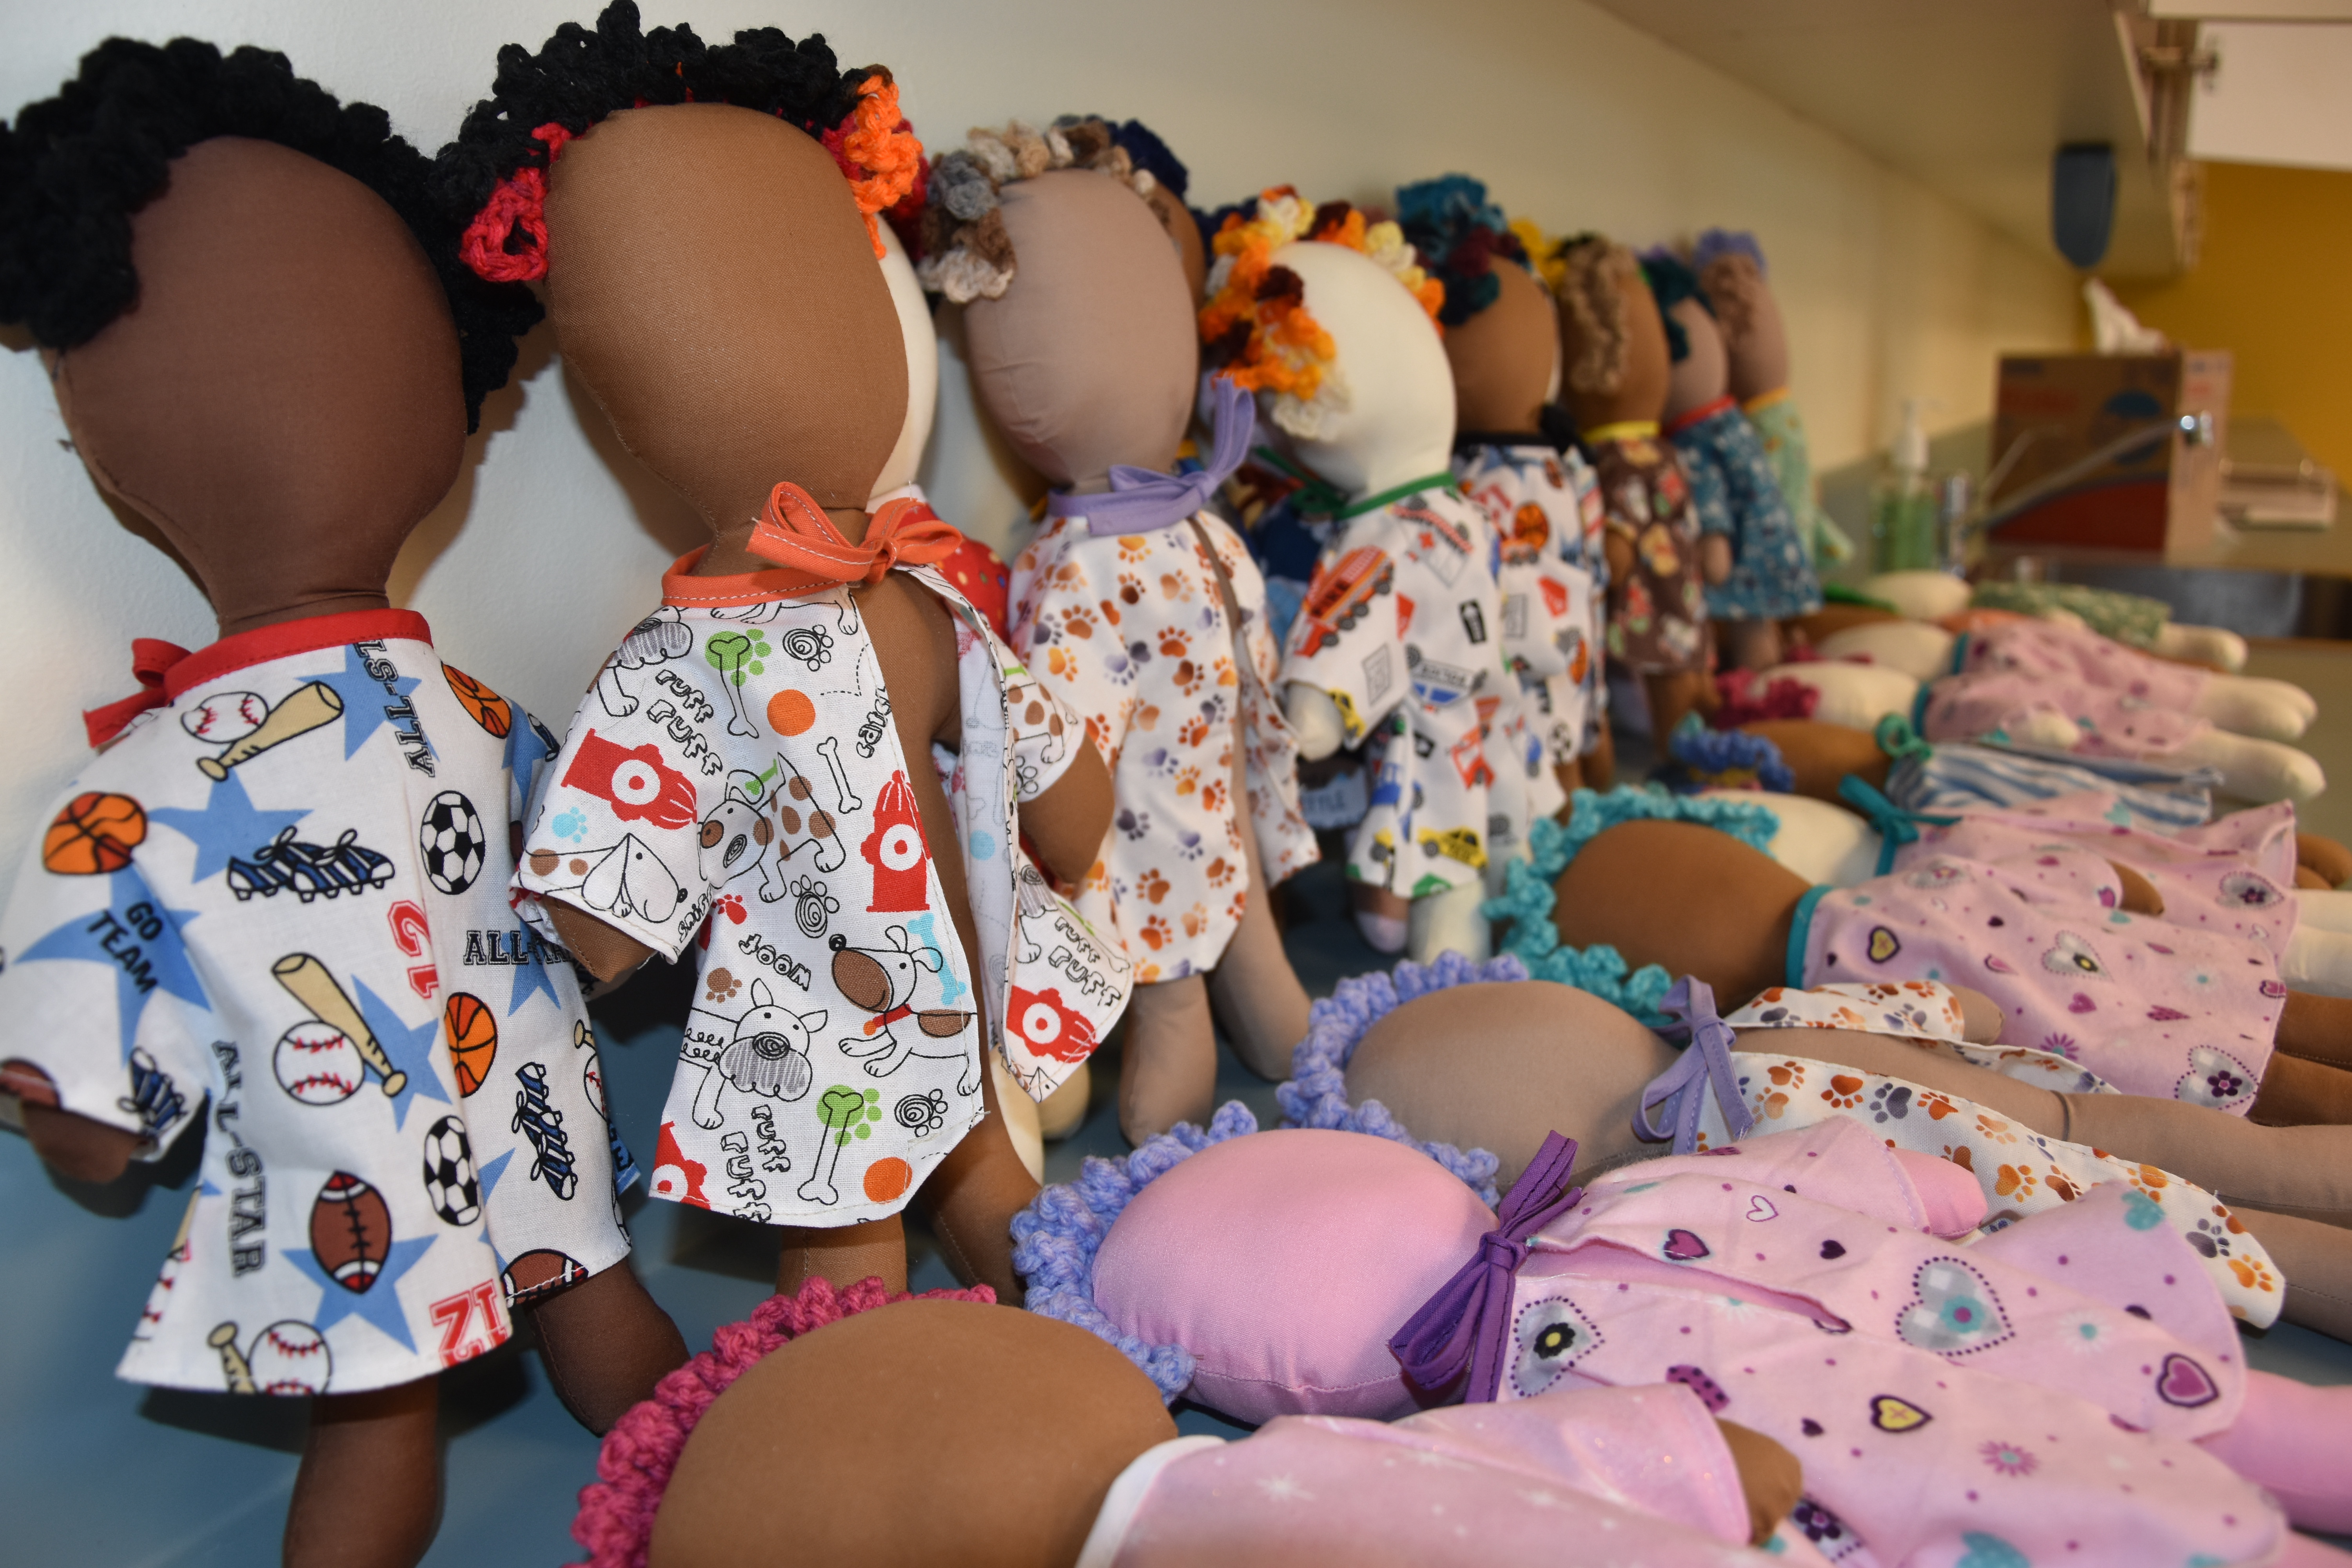 Handmade dolls from the Lincolnia Dollmakers.